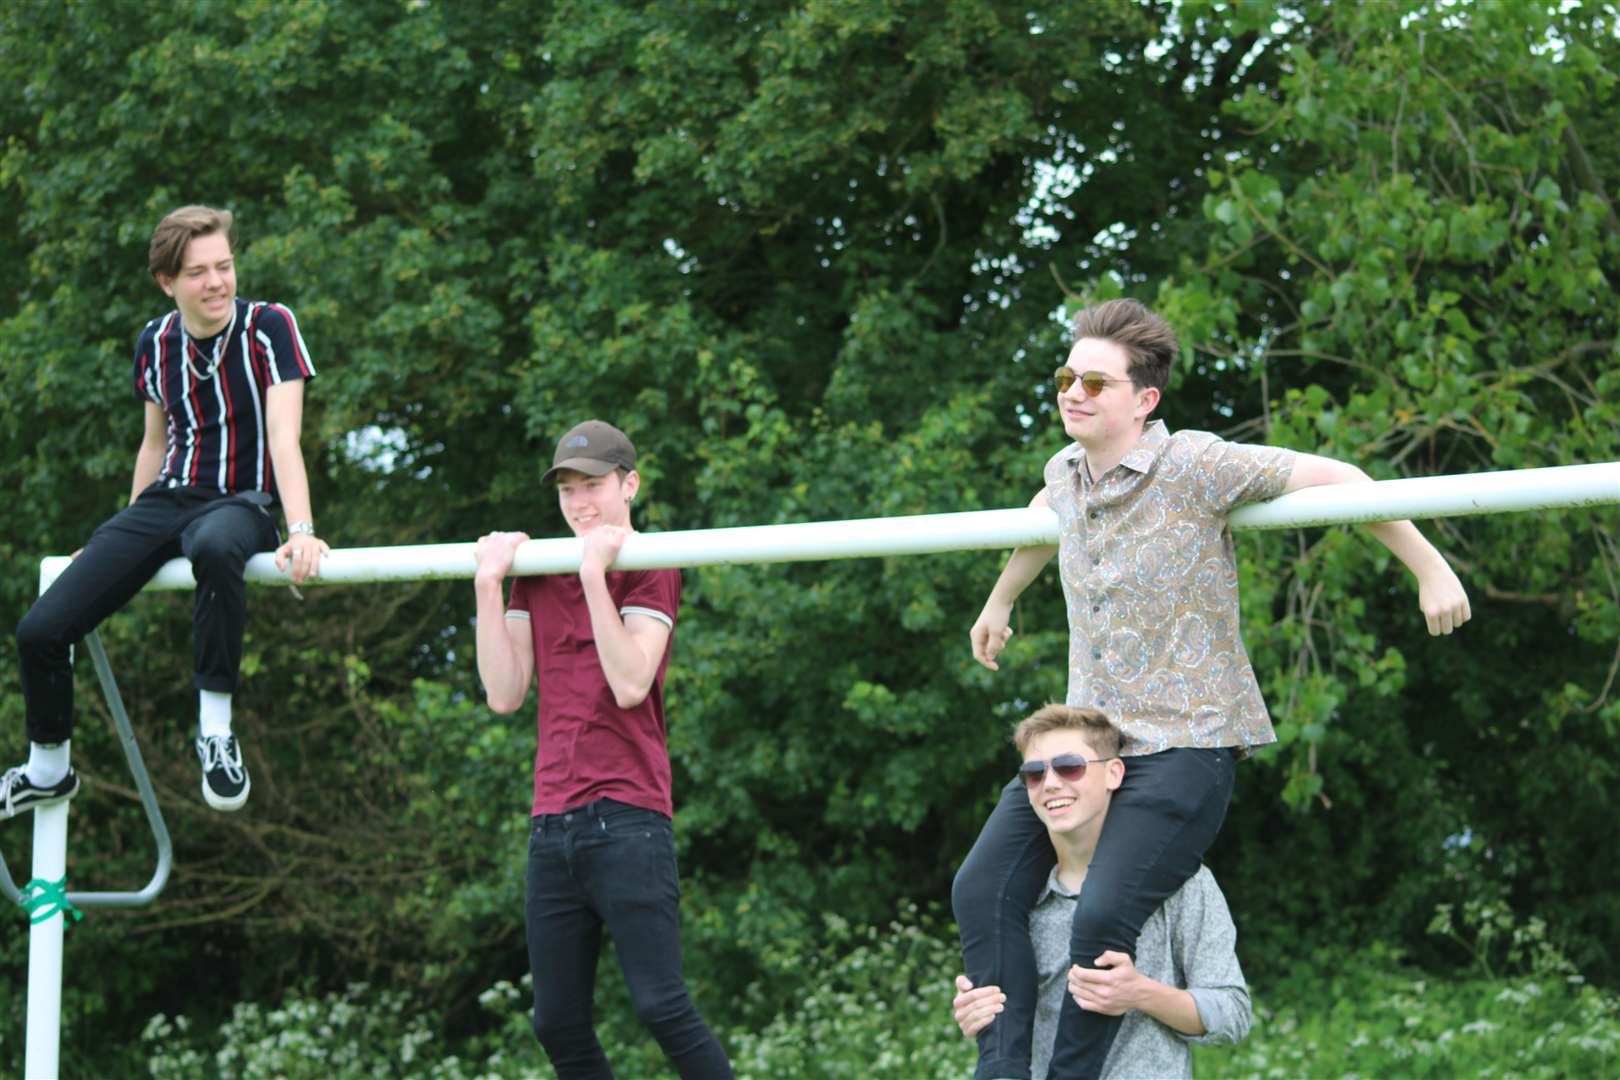 The Polygons: from left, Sam Couchman, Keelan Shrimpton with Will Aers on Joshua Hall's shoulders.